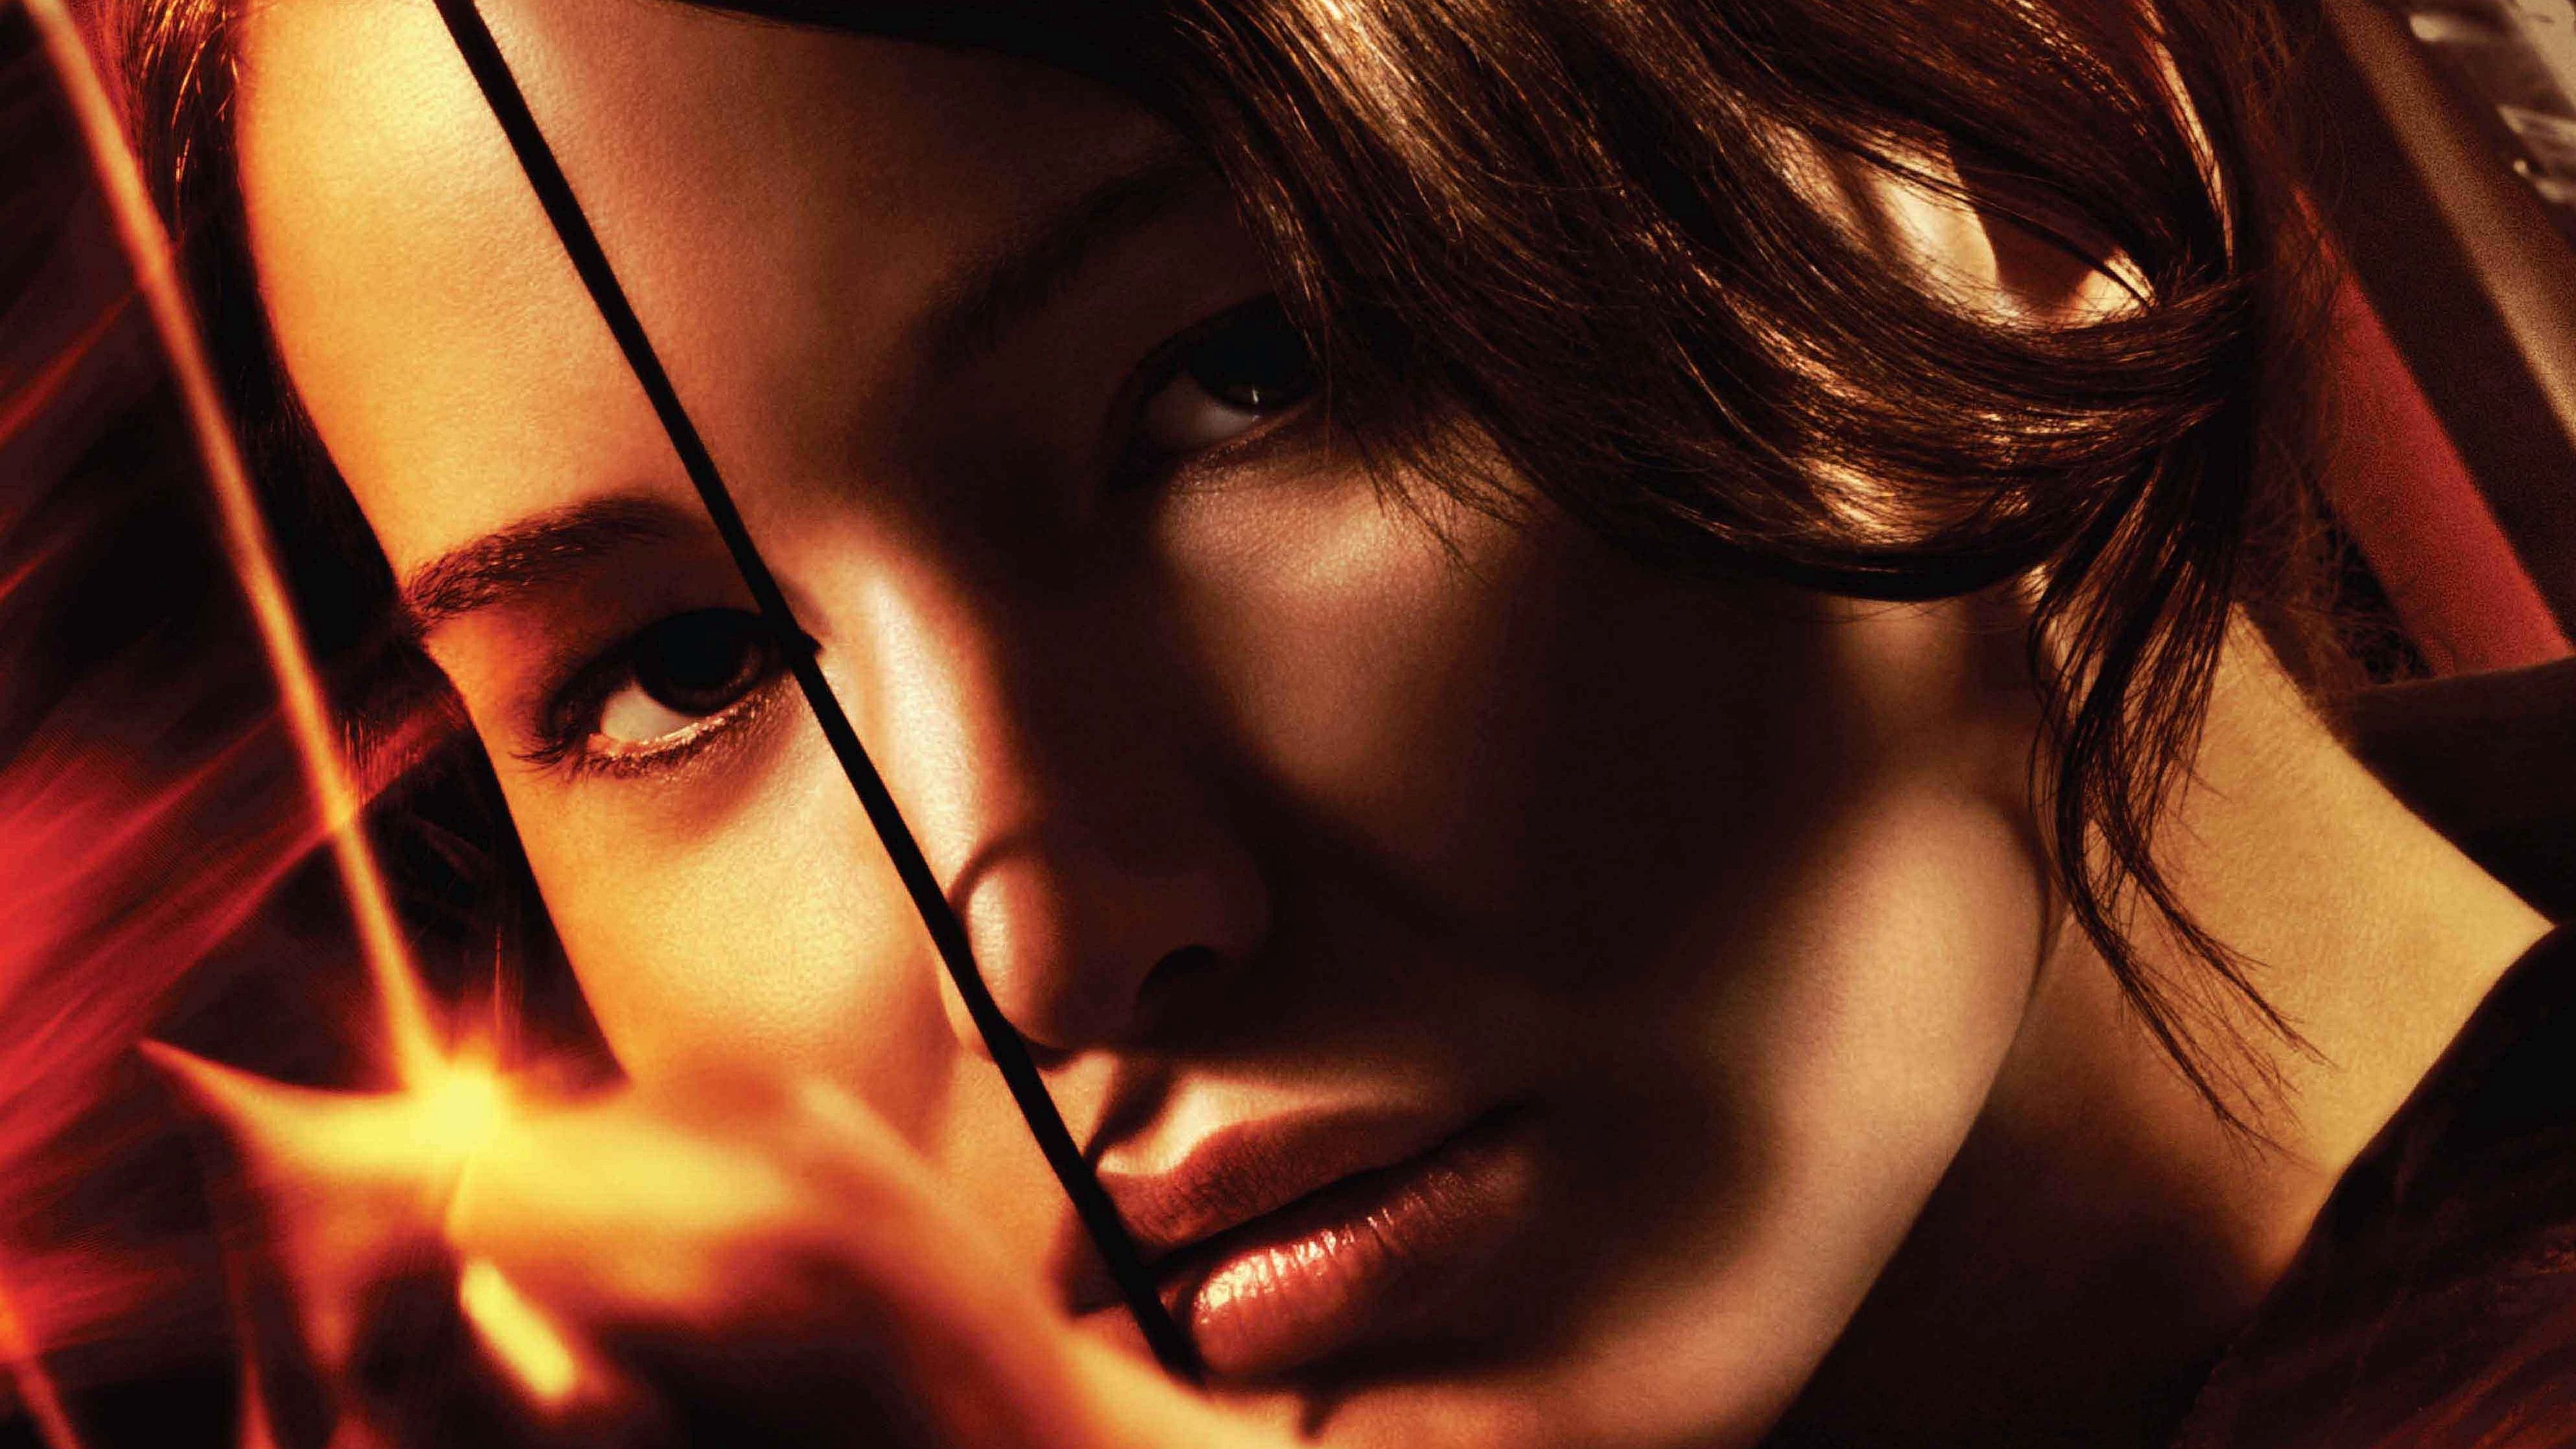 The Hunger Games movie poster with Katniss Everdeen holding a bow and arrow. - Jennifer Lawrence